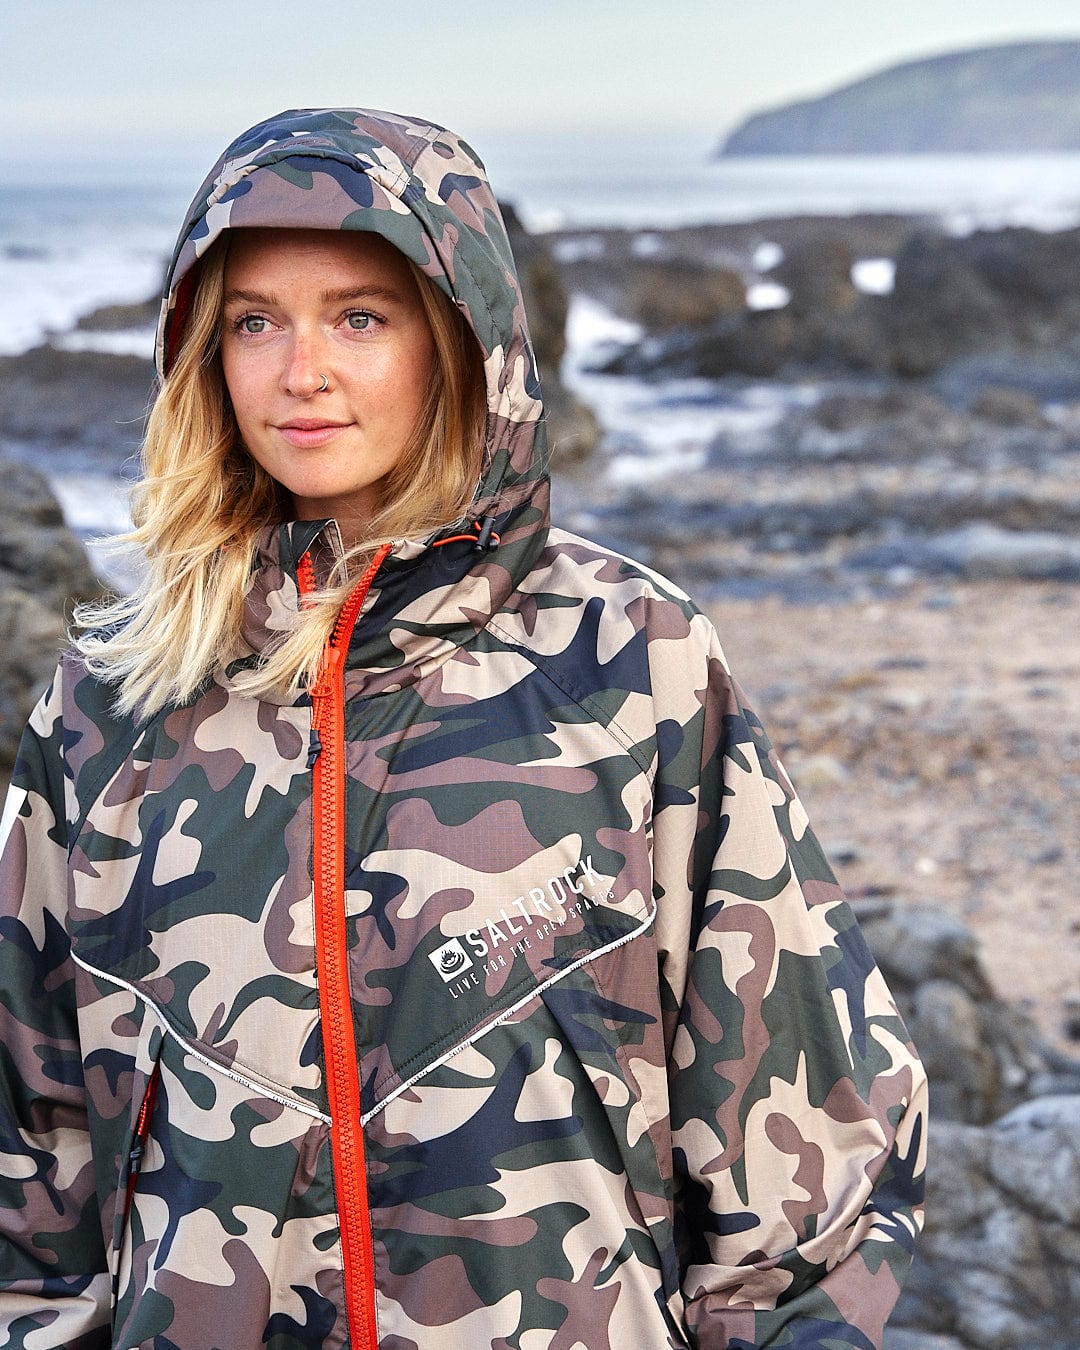 Woman in a Saltrock Recycled Four Seasons Changing Robe - Brown Camo, standing on a rocky beach with the ocean and cliffs in the background.